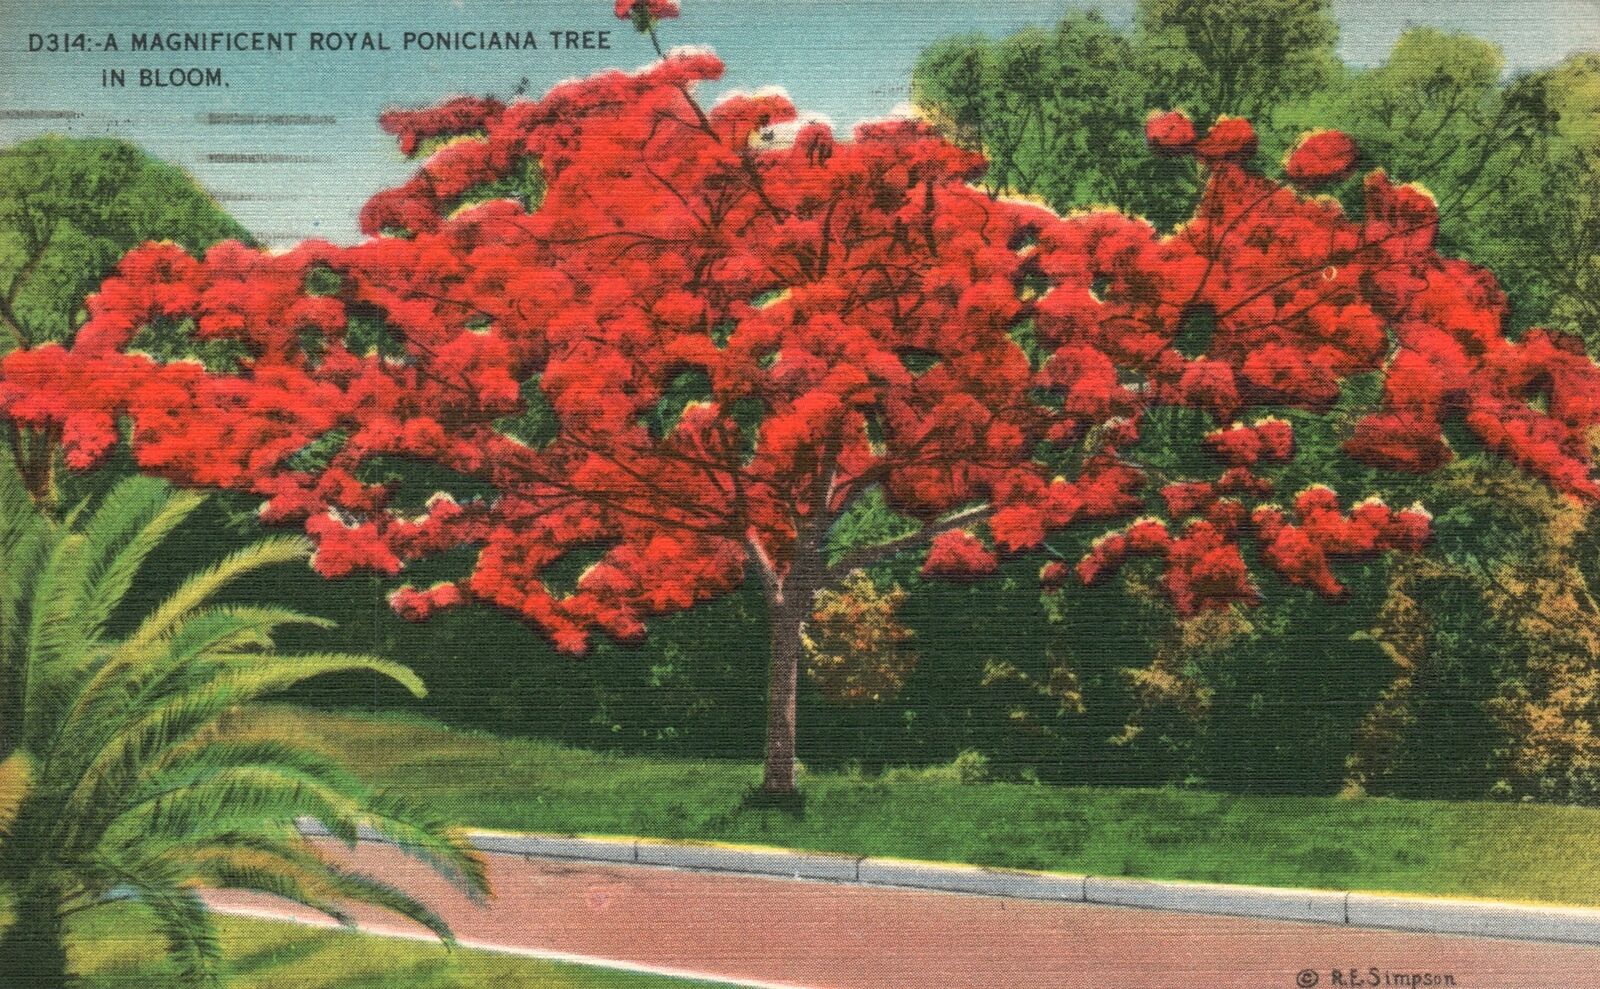 Vintage Postcard 1949 A Magnificent Royal Poinciana Tree In Bloom